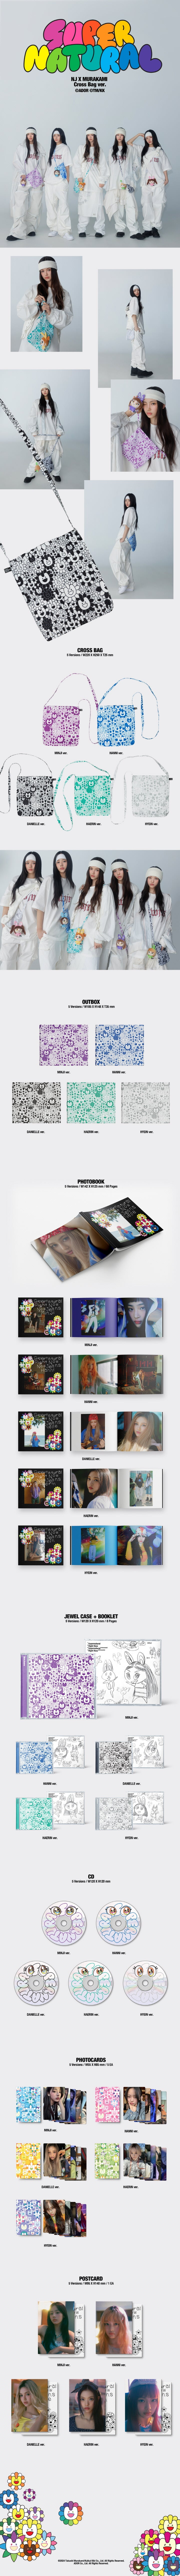 1 CD 
1 Cross Bag
1 Photobook (68 pages)
1 Jewel Case + Booklet (8 pages)
5 Photo Cards 
1 Post Card